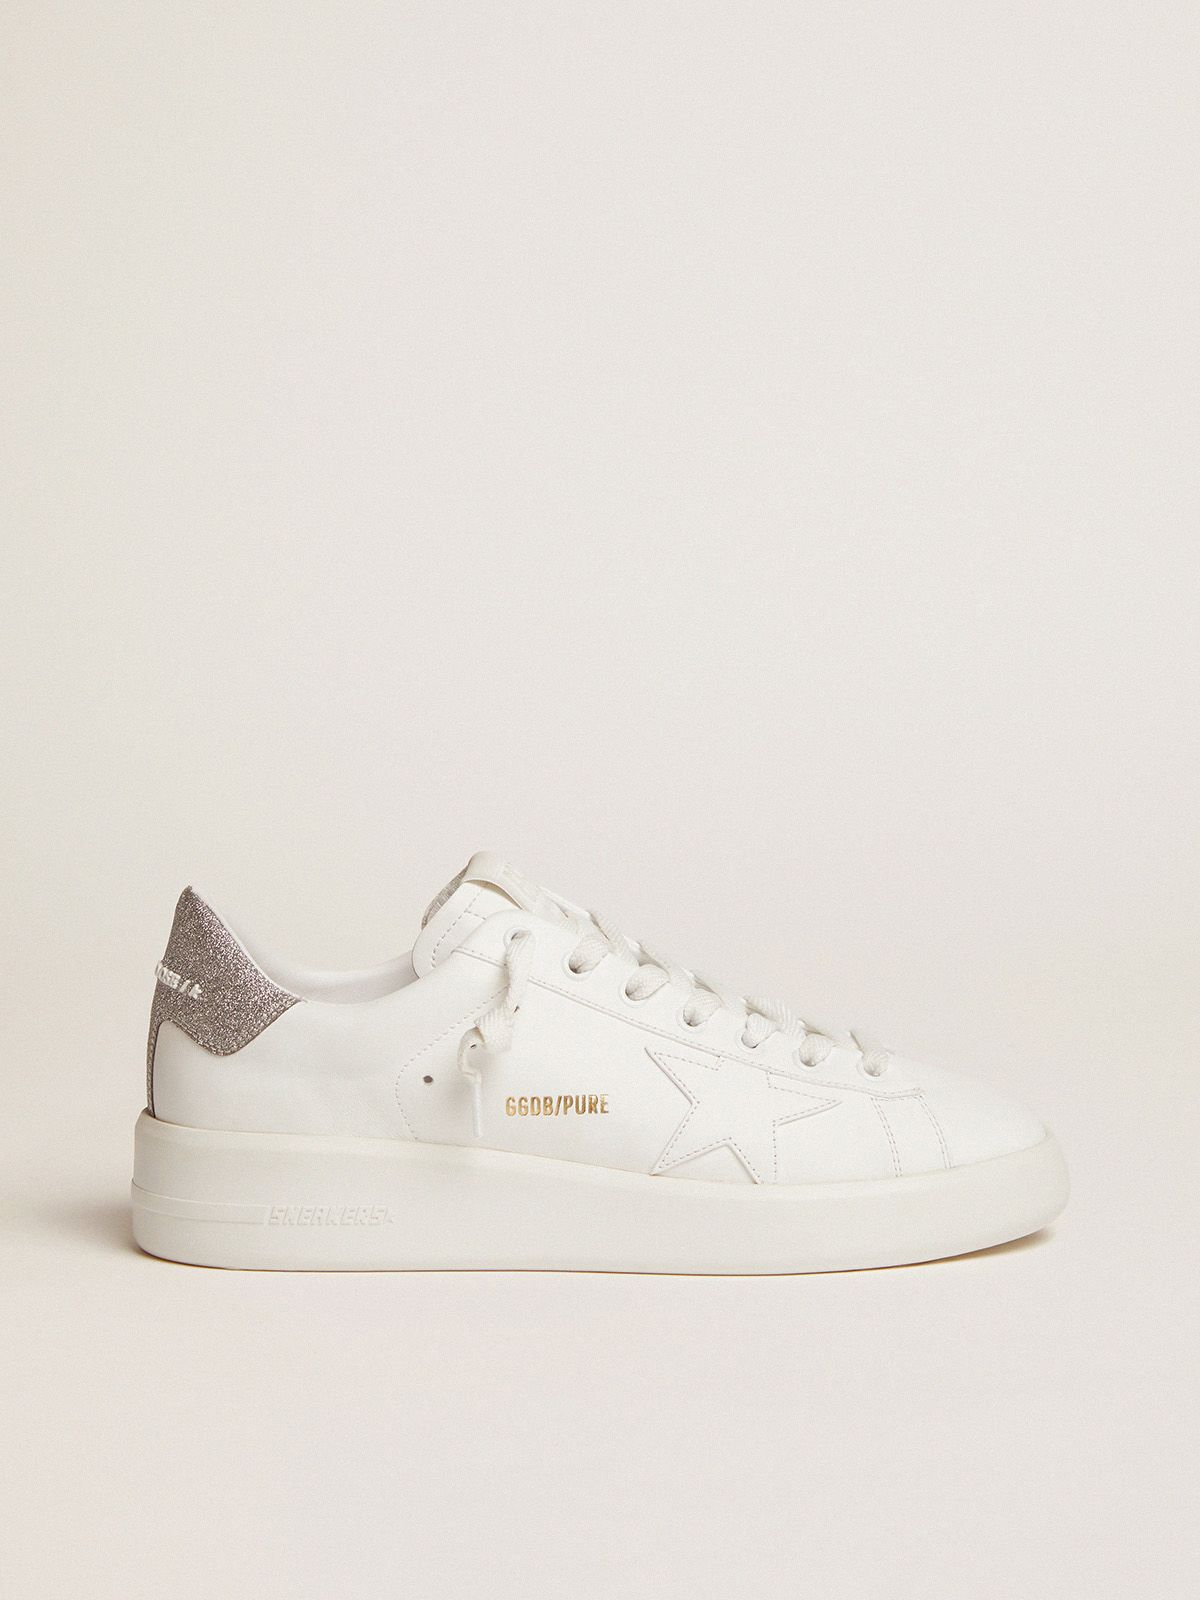 golden goose Purestar glittery silver heel sneakers tab with